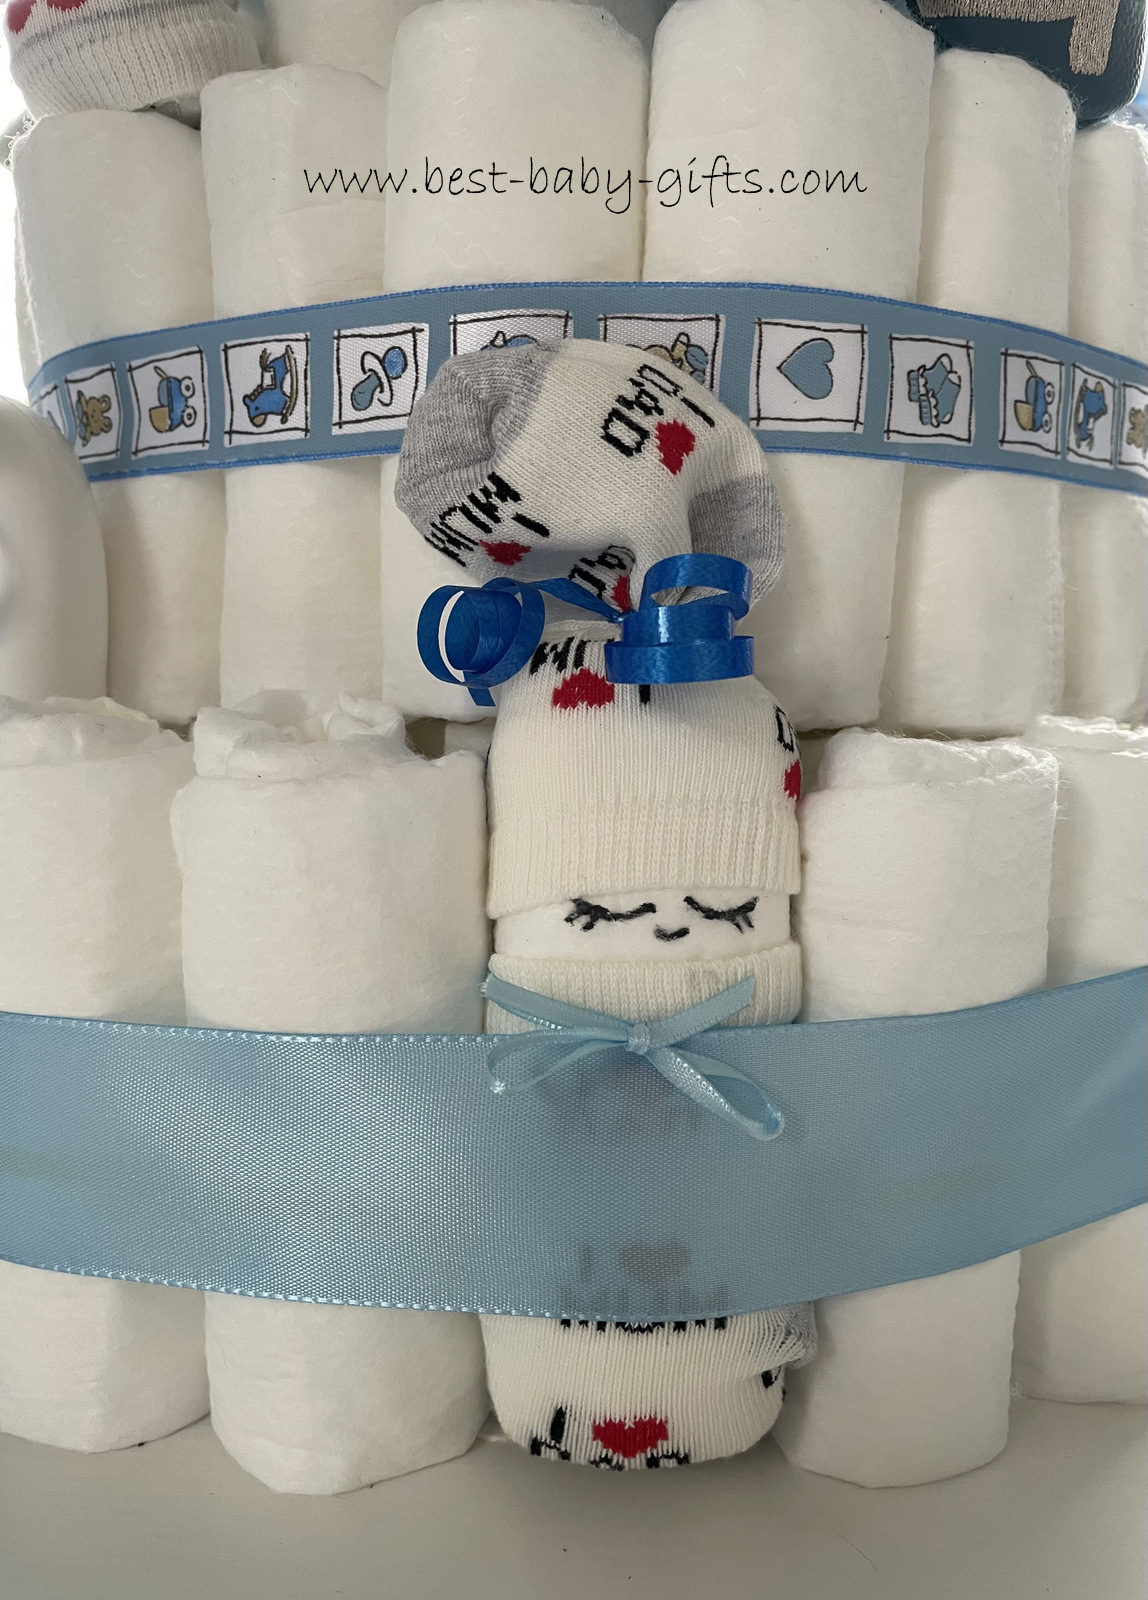 detail of diaper cake with diaper baby, blue ribbon